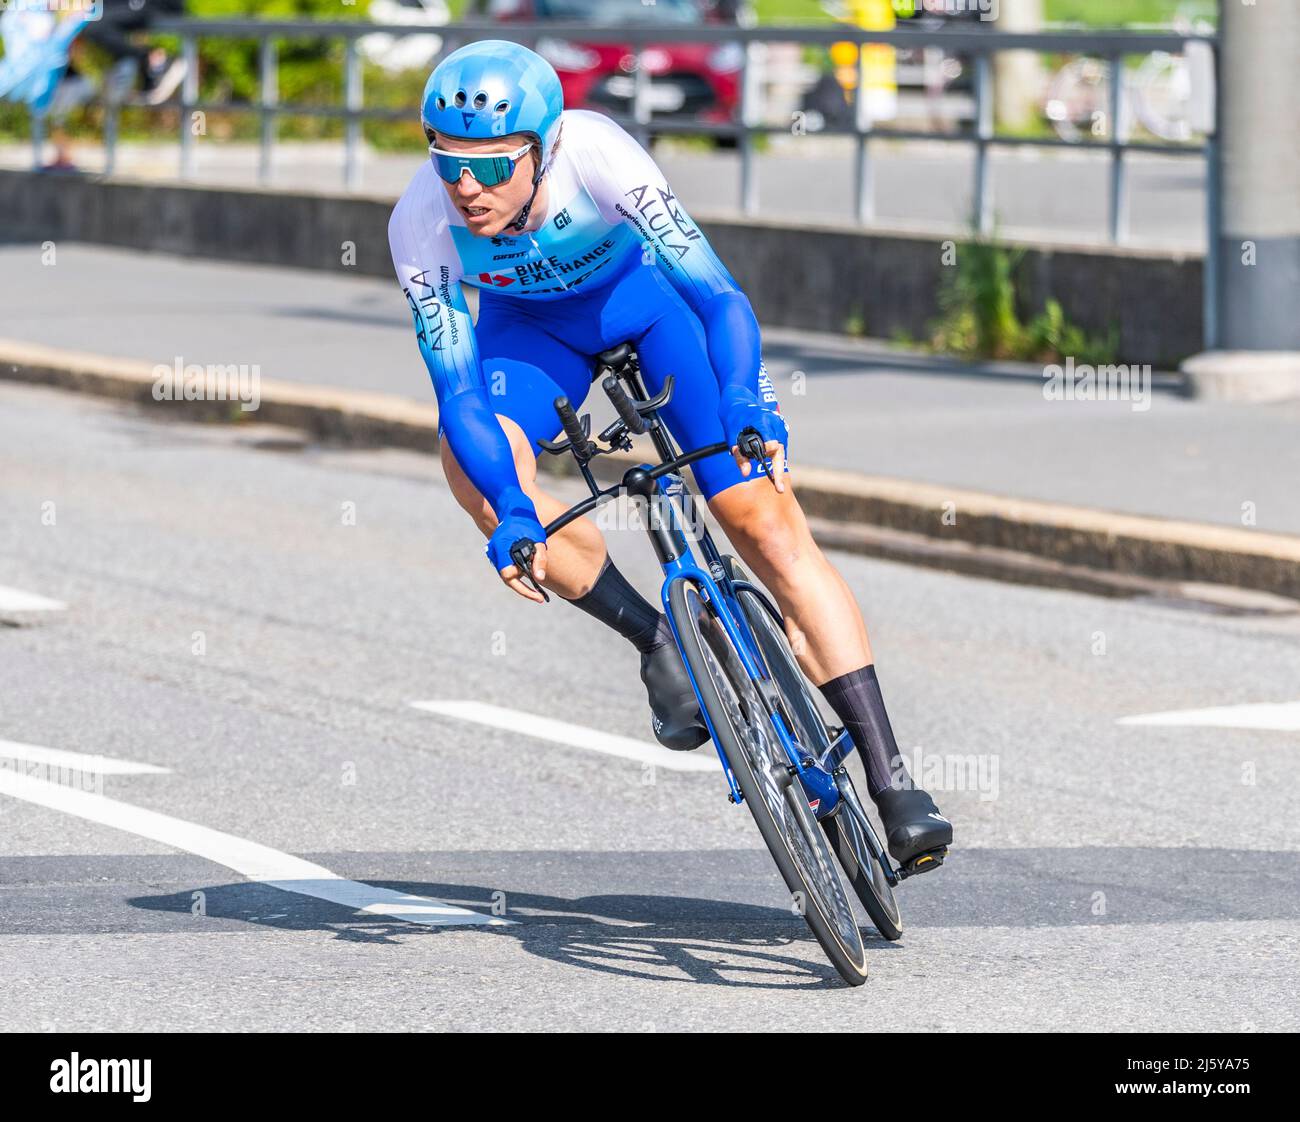 Lausanne Switzerland, 04/26/2022: Julien Bernard of France  is in action during the Prologue of the Tour of Romandie 2022. Credit: Eric Dubost/Alamy Live News. Stock Photo